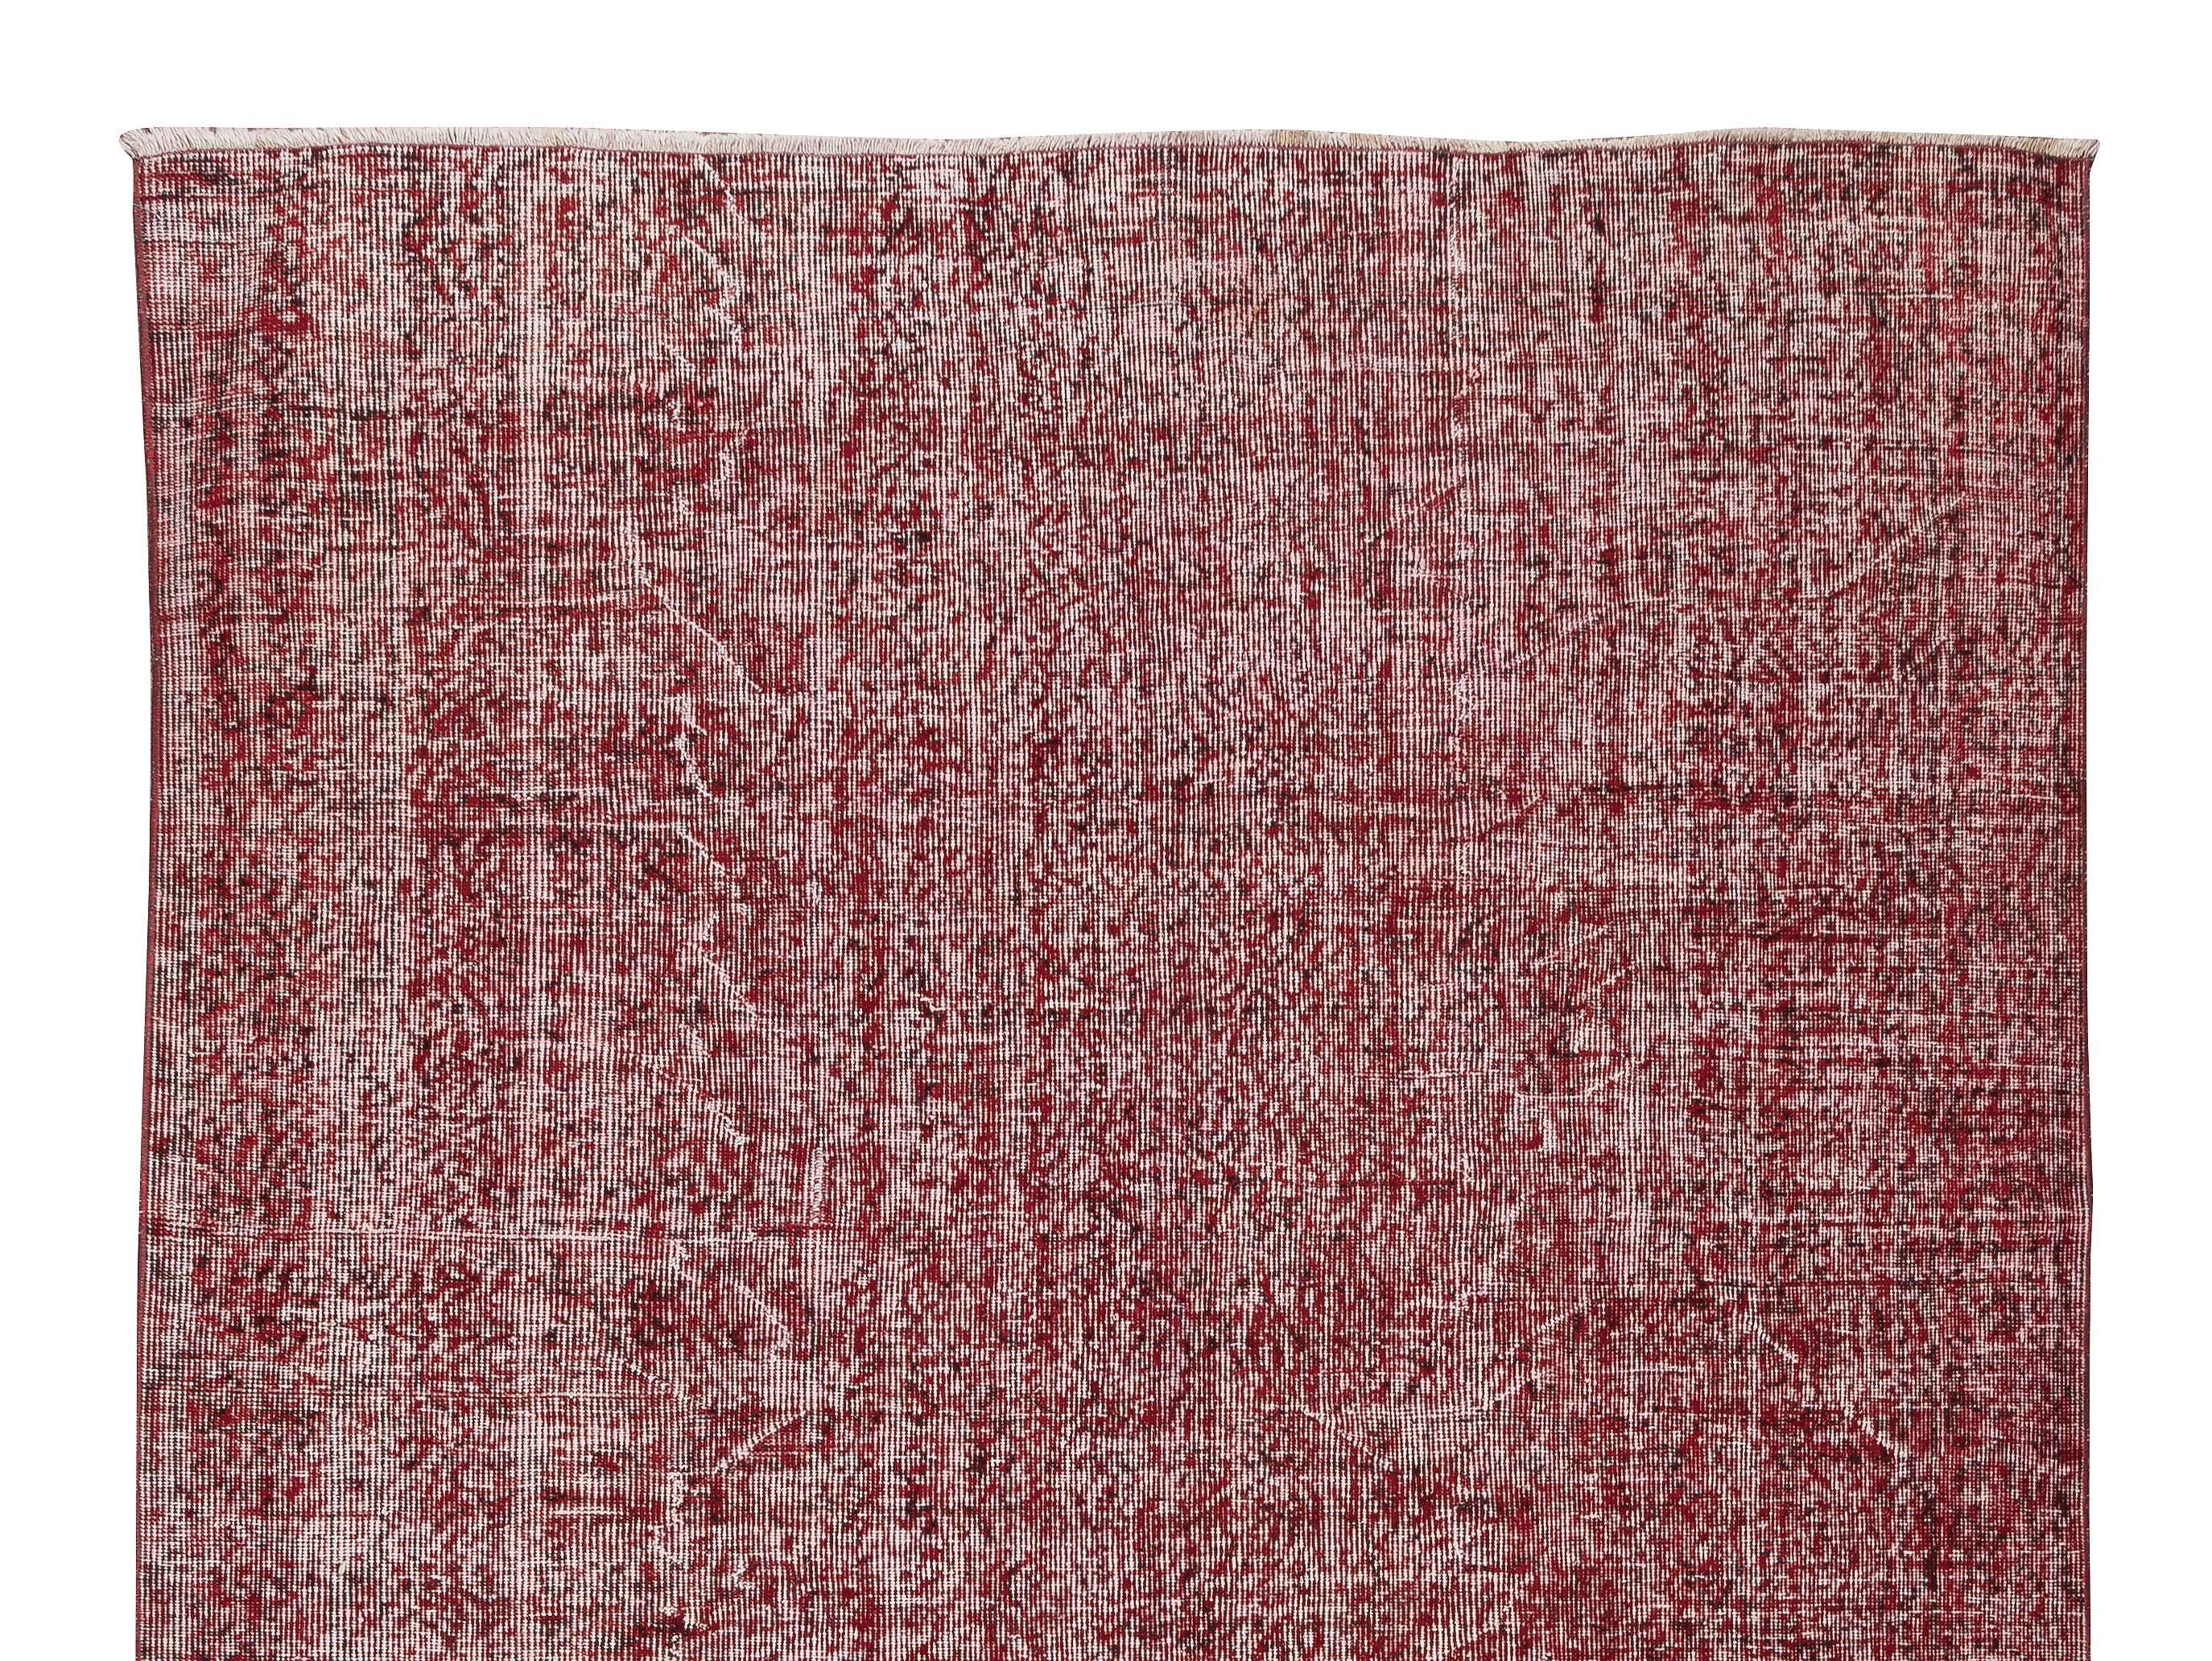 Hand-Knotted 6.4x9.6 Ft Handmade Turkish Vintage Distressed Wool Area Rug in Burgundy Red For Sale